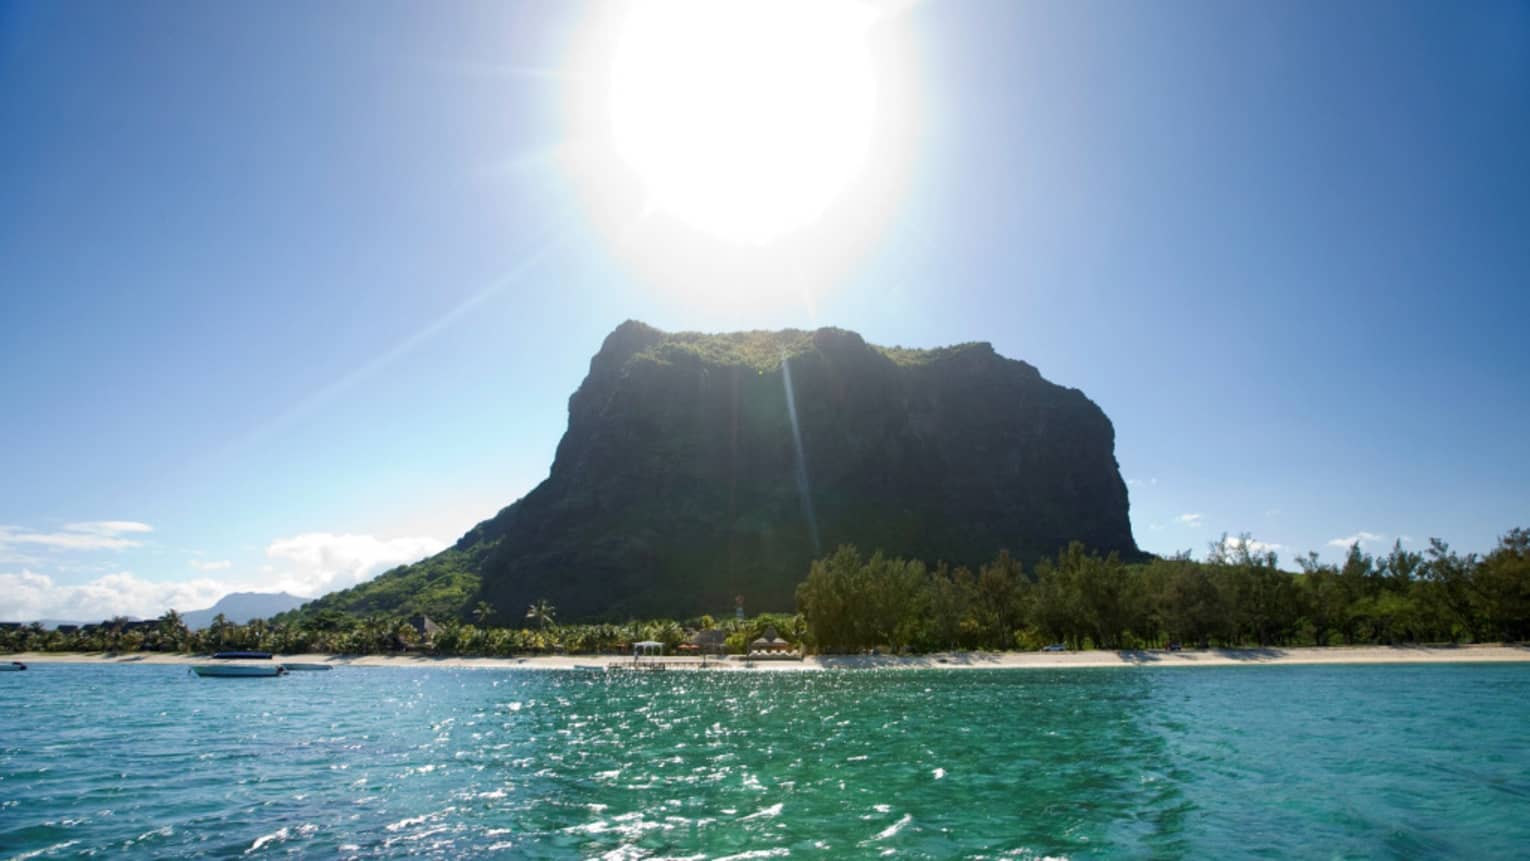 Long view of a forested monolith mountain sitting atop crystal waters. Sun beams down from above in a clear blue sky.